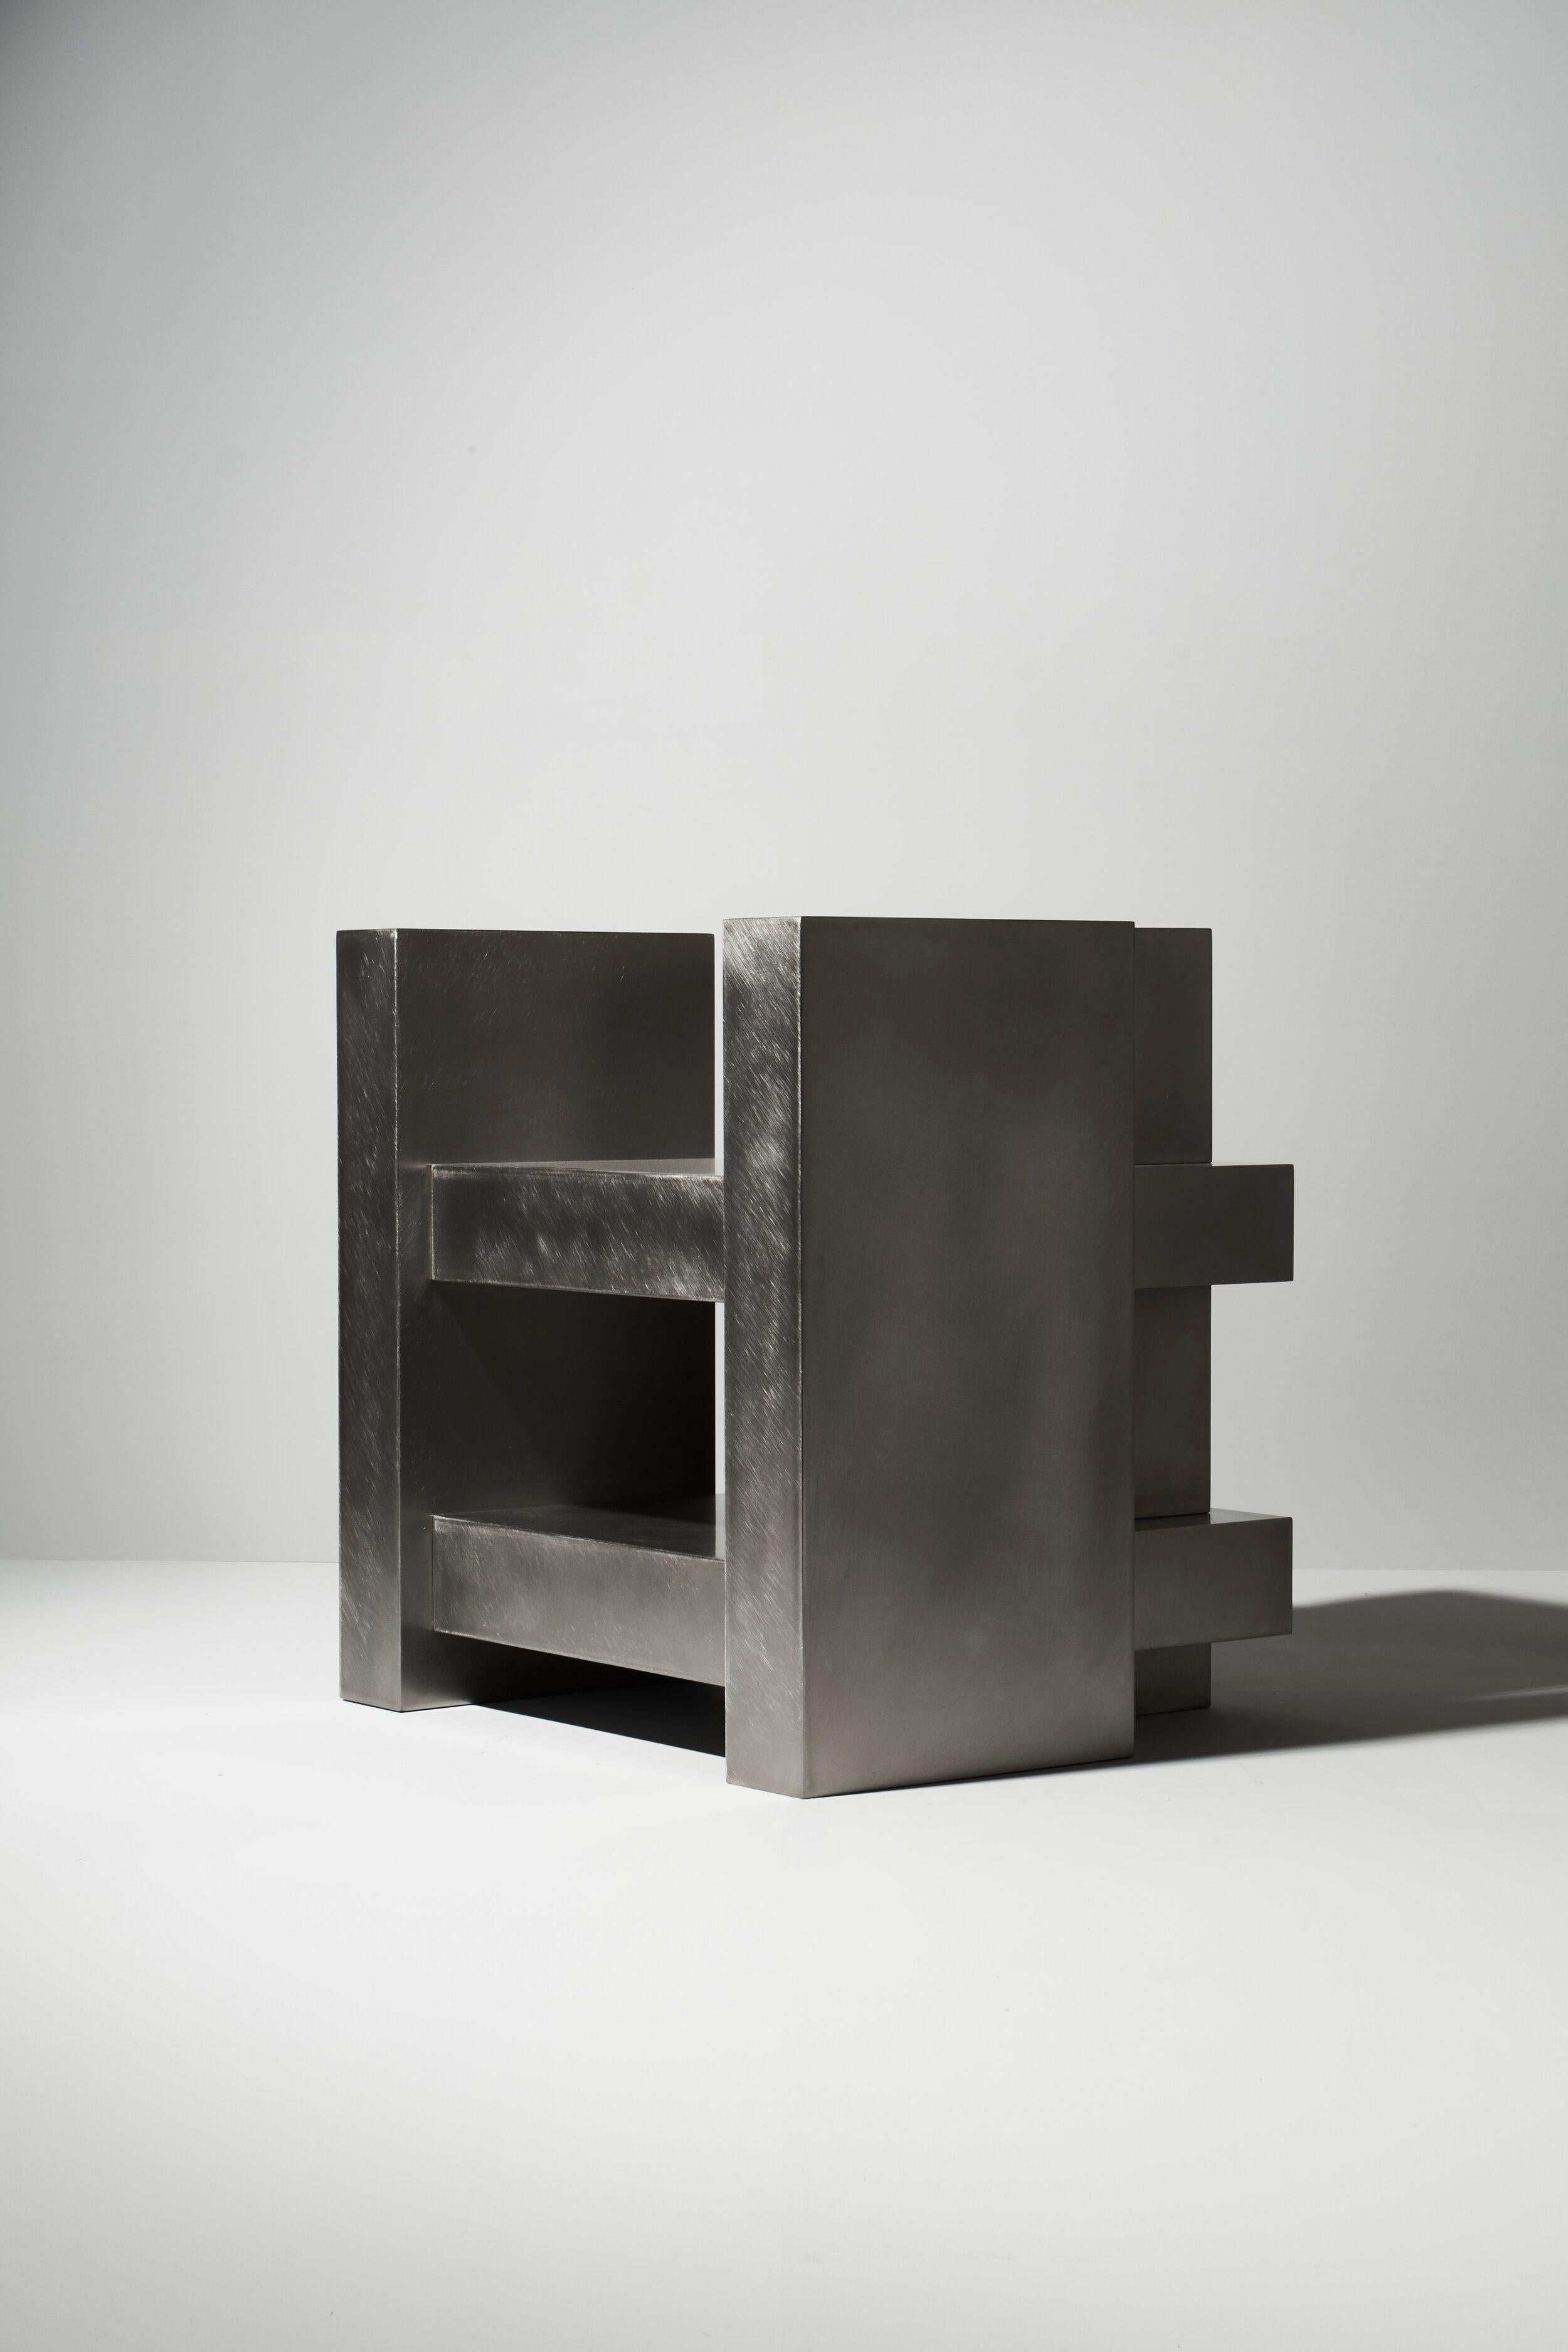 Post-Modern Layered Steel Seat by Hyungshin Hwang For Sale